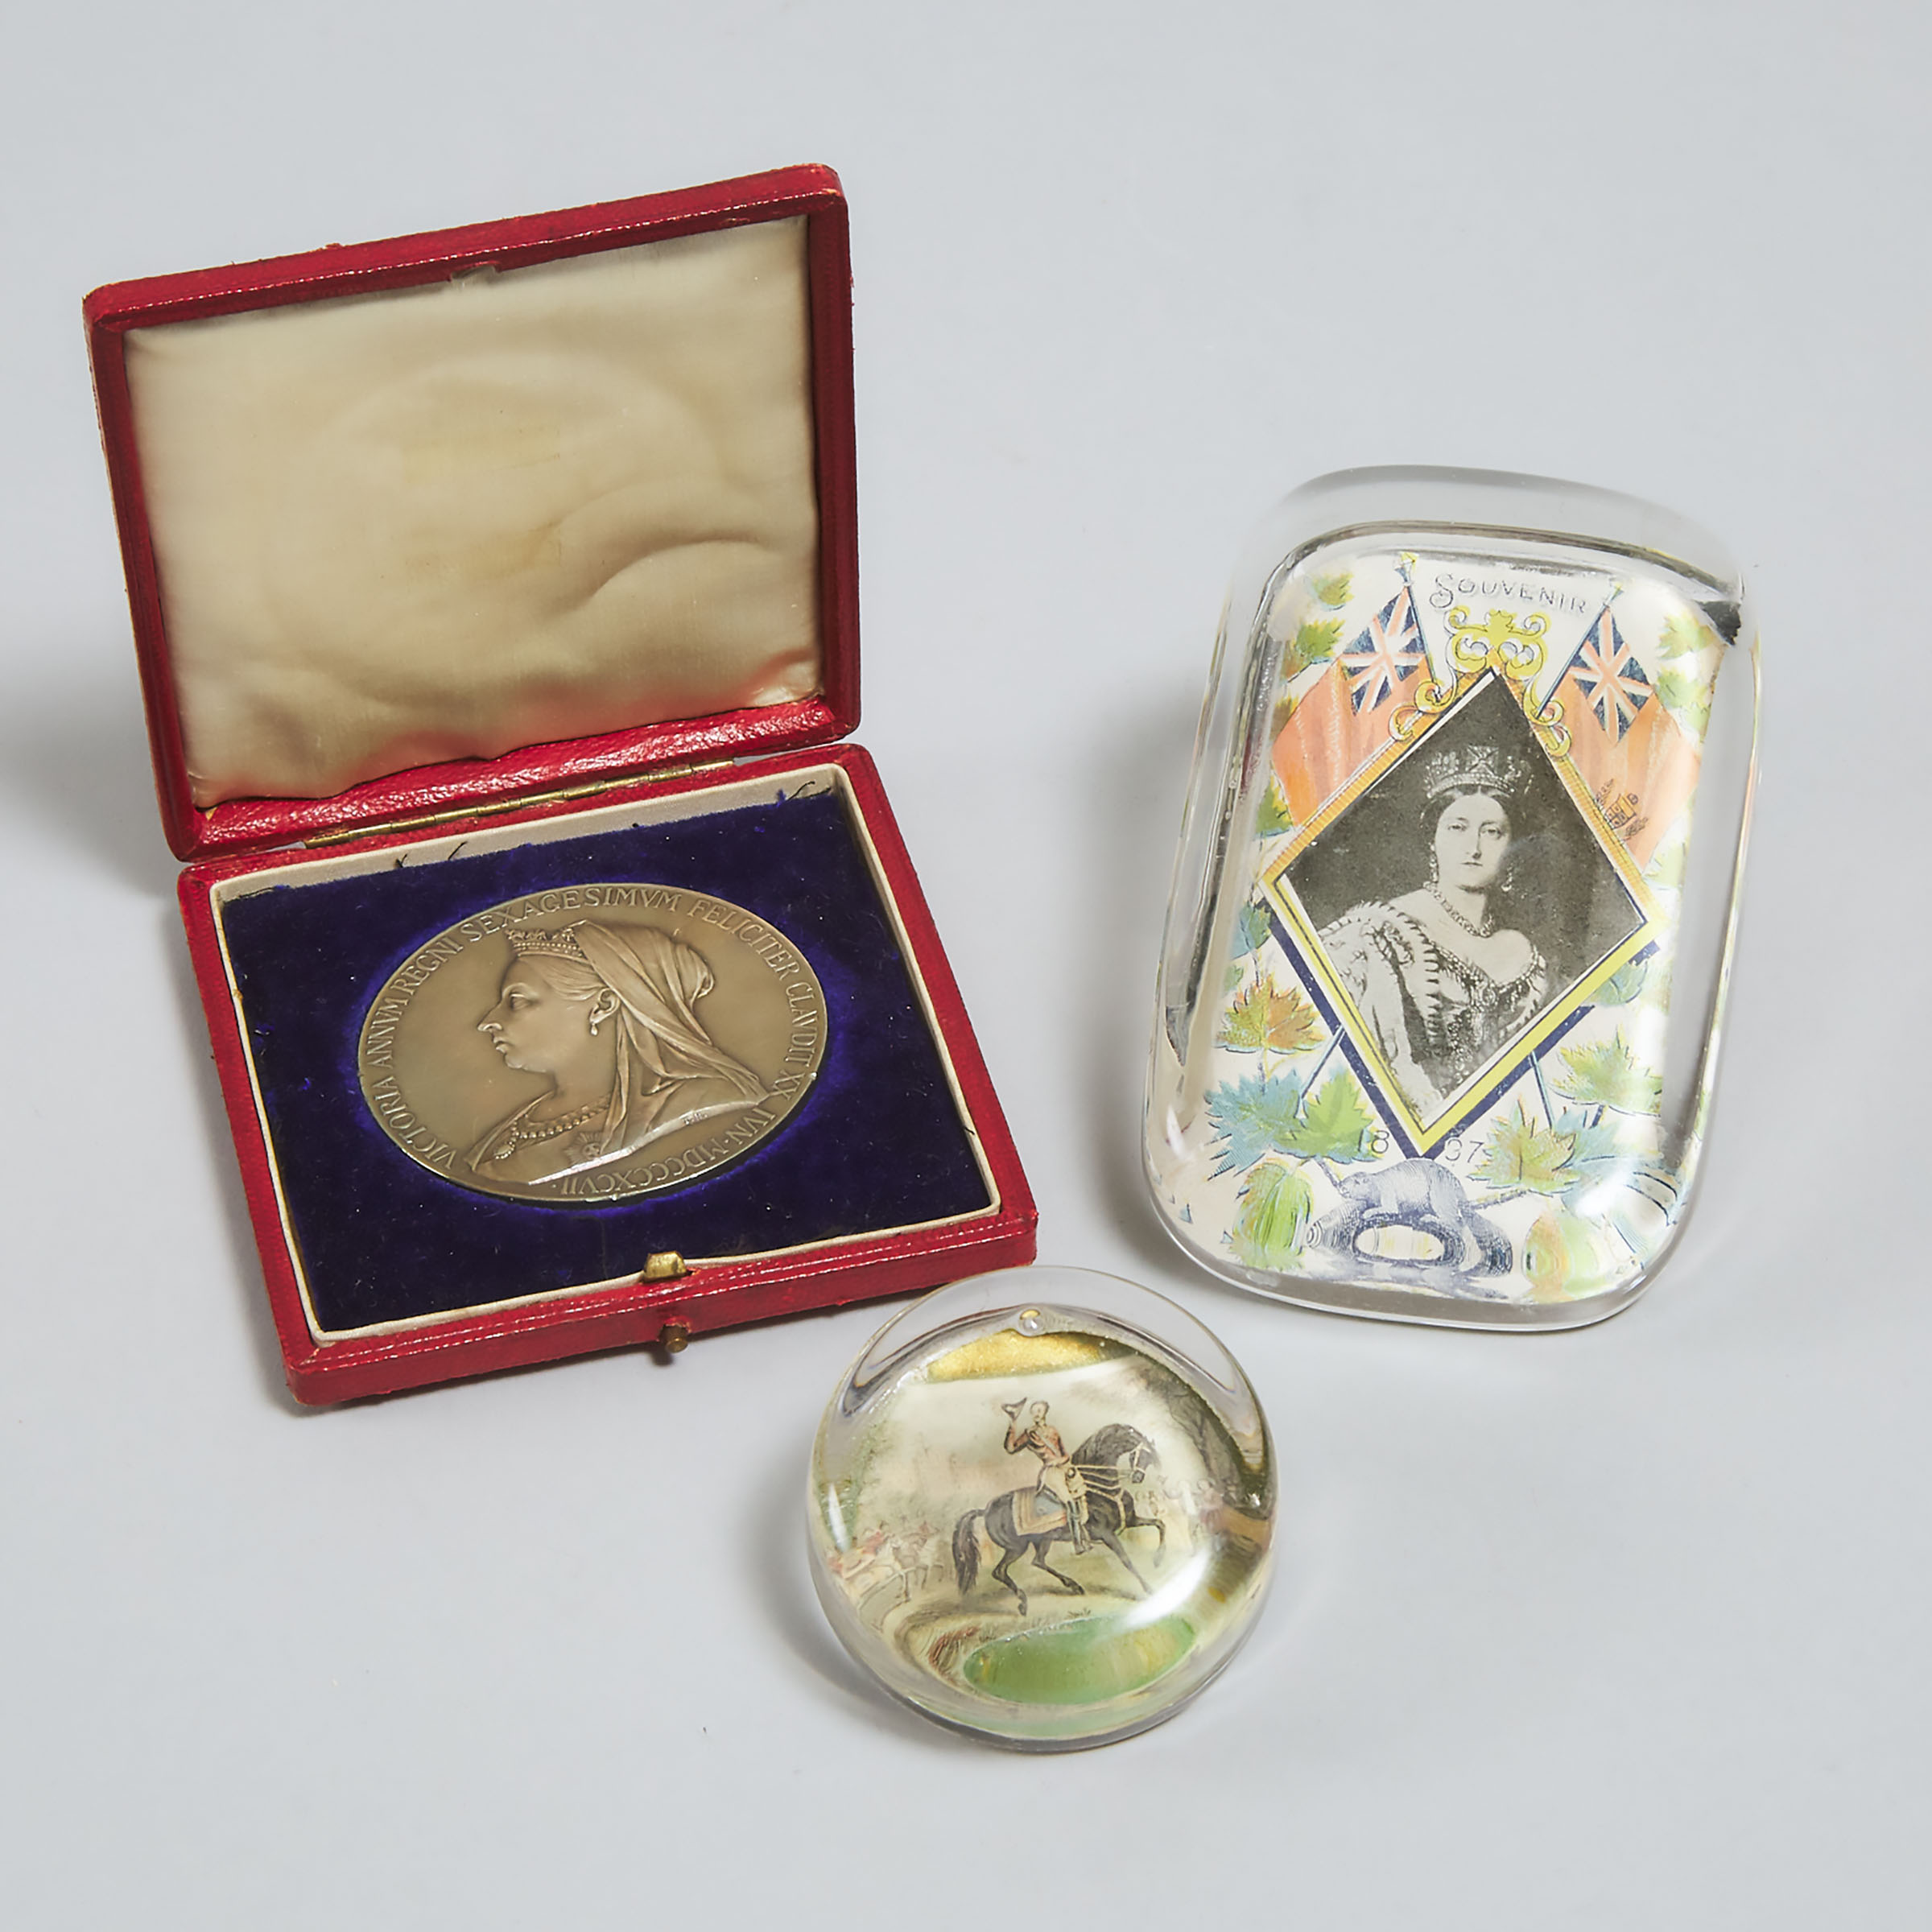 Victoria and Albert: Two Paperweights and a Medallion, 1837 - 1897